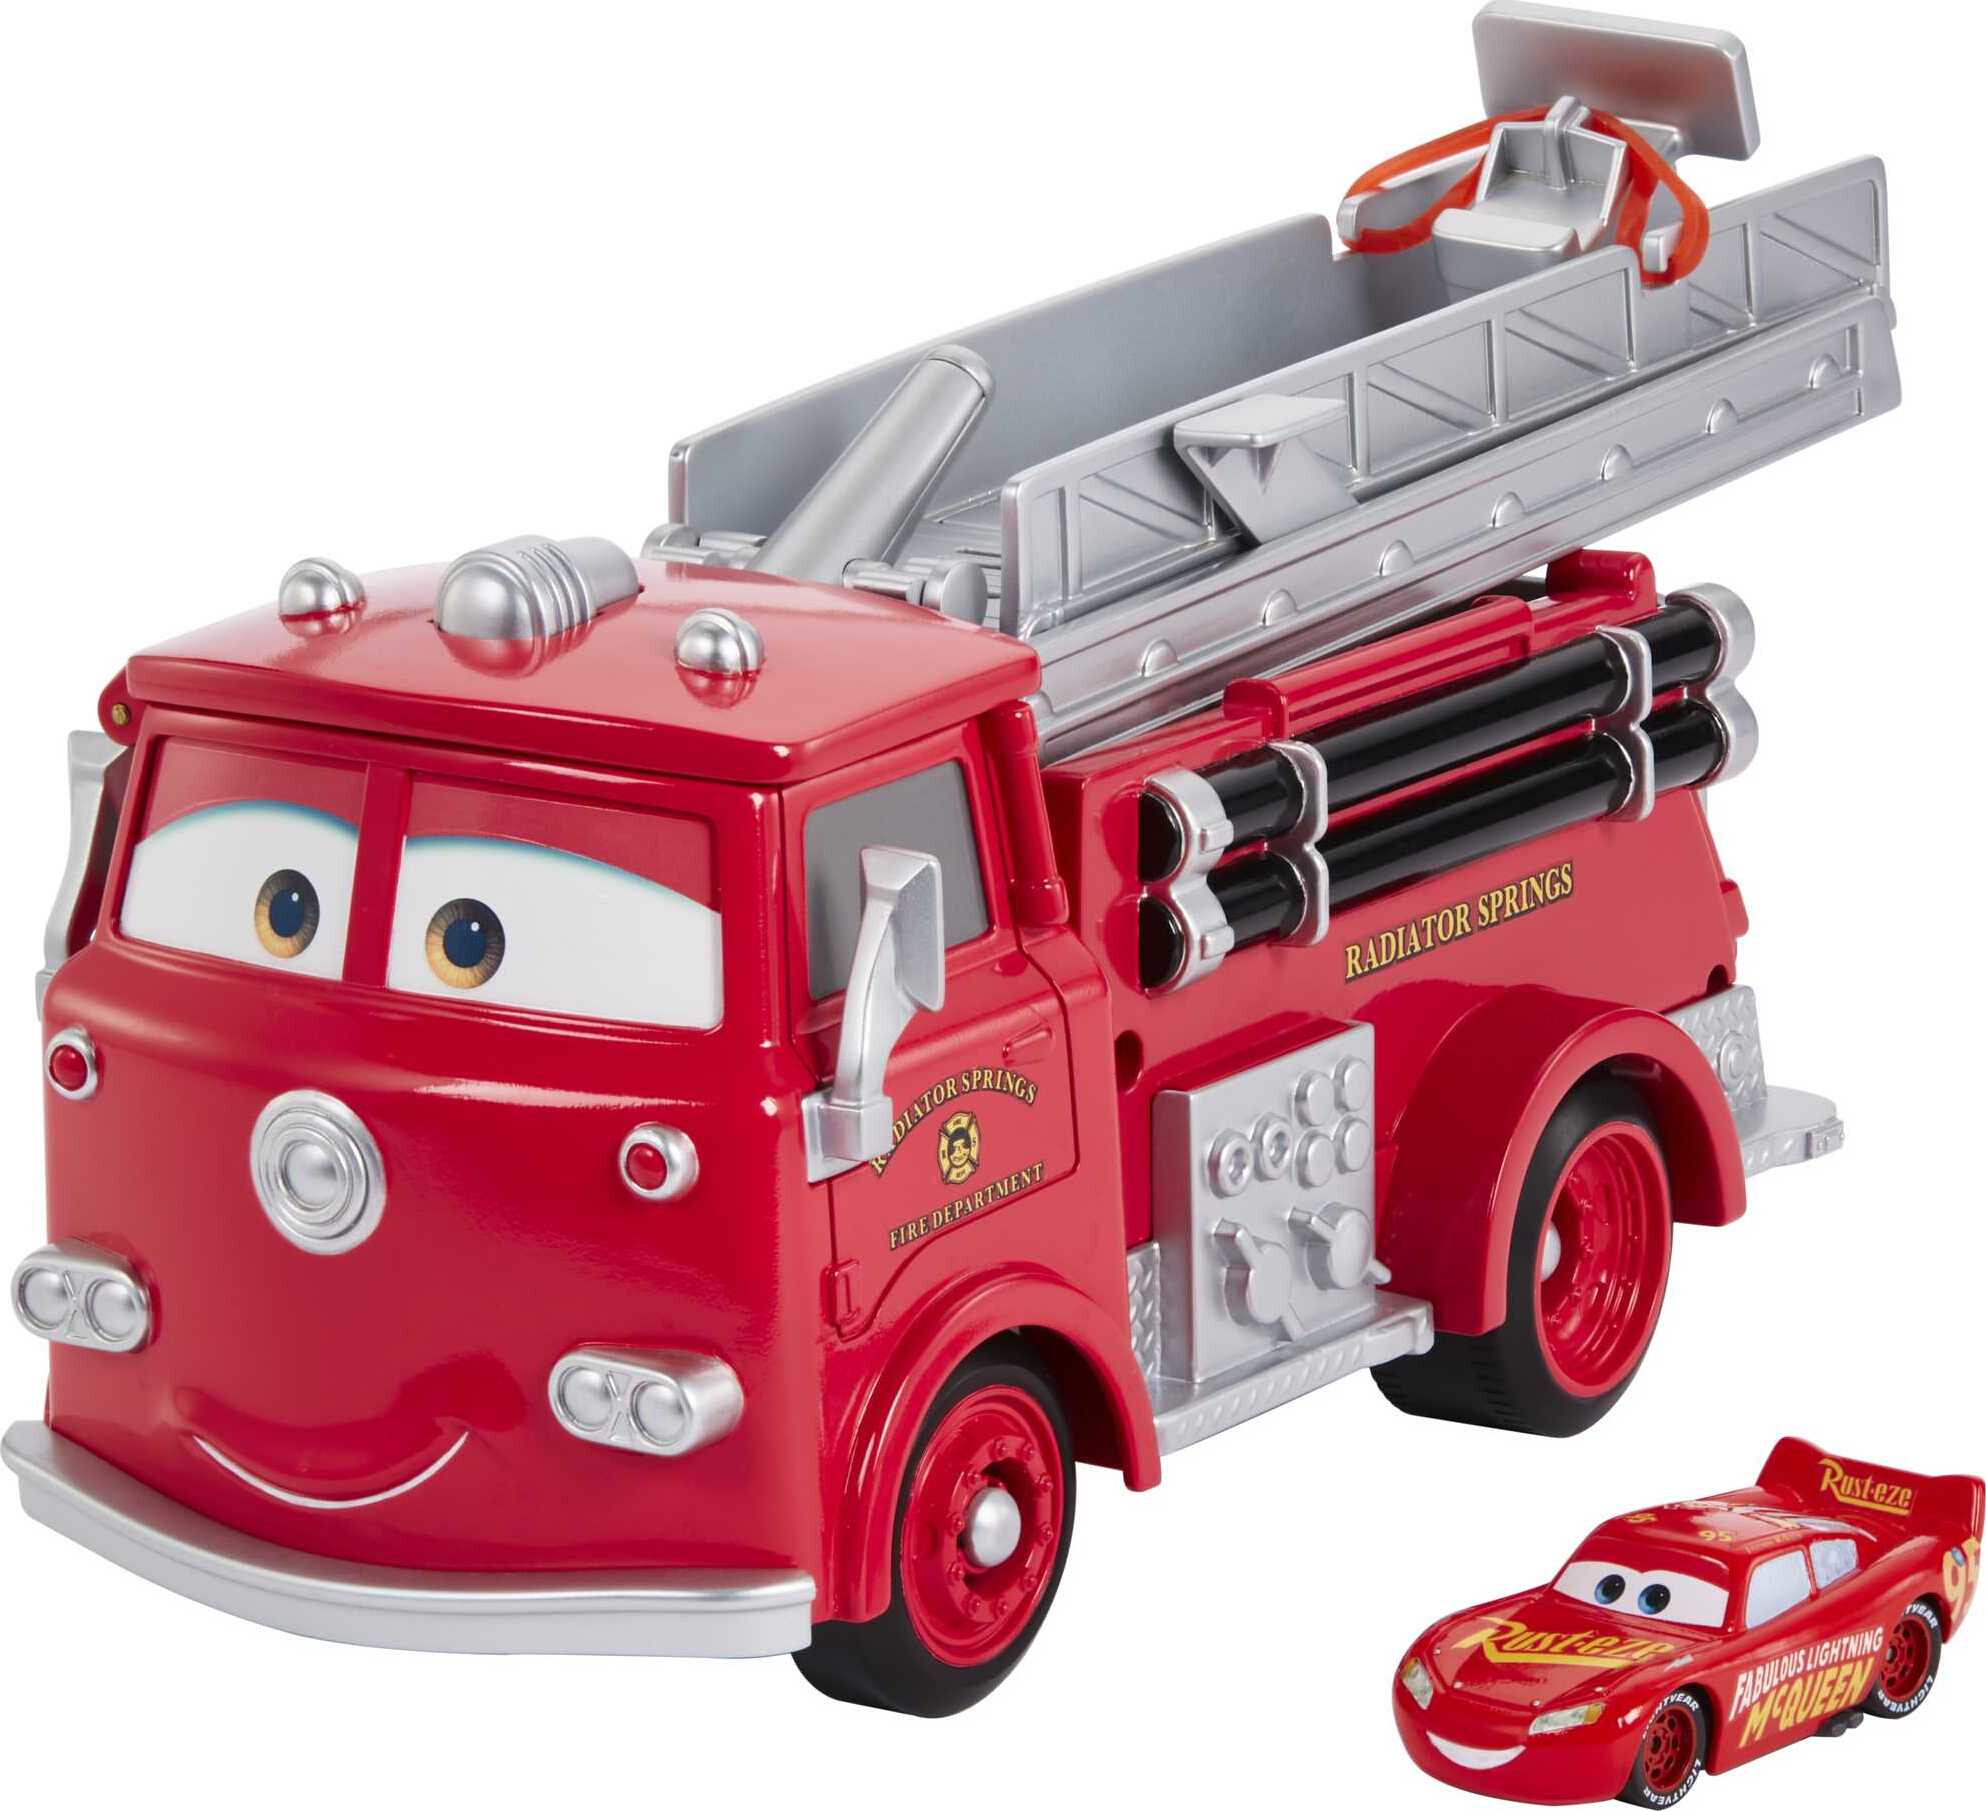 Disney Pixar Cars Stunt and Splash Red with Exclusive Color Change Lightning McQueen Vehicle - image 1 of 7